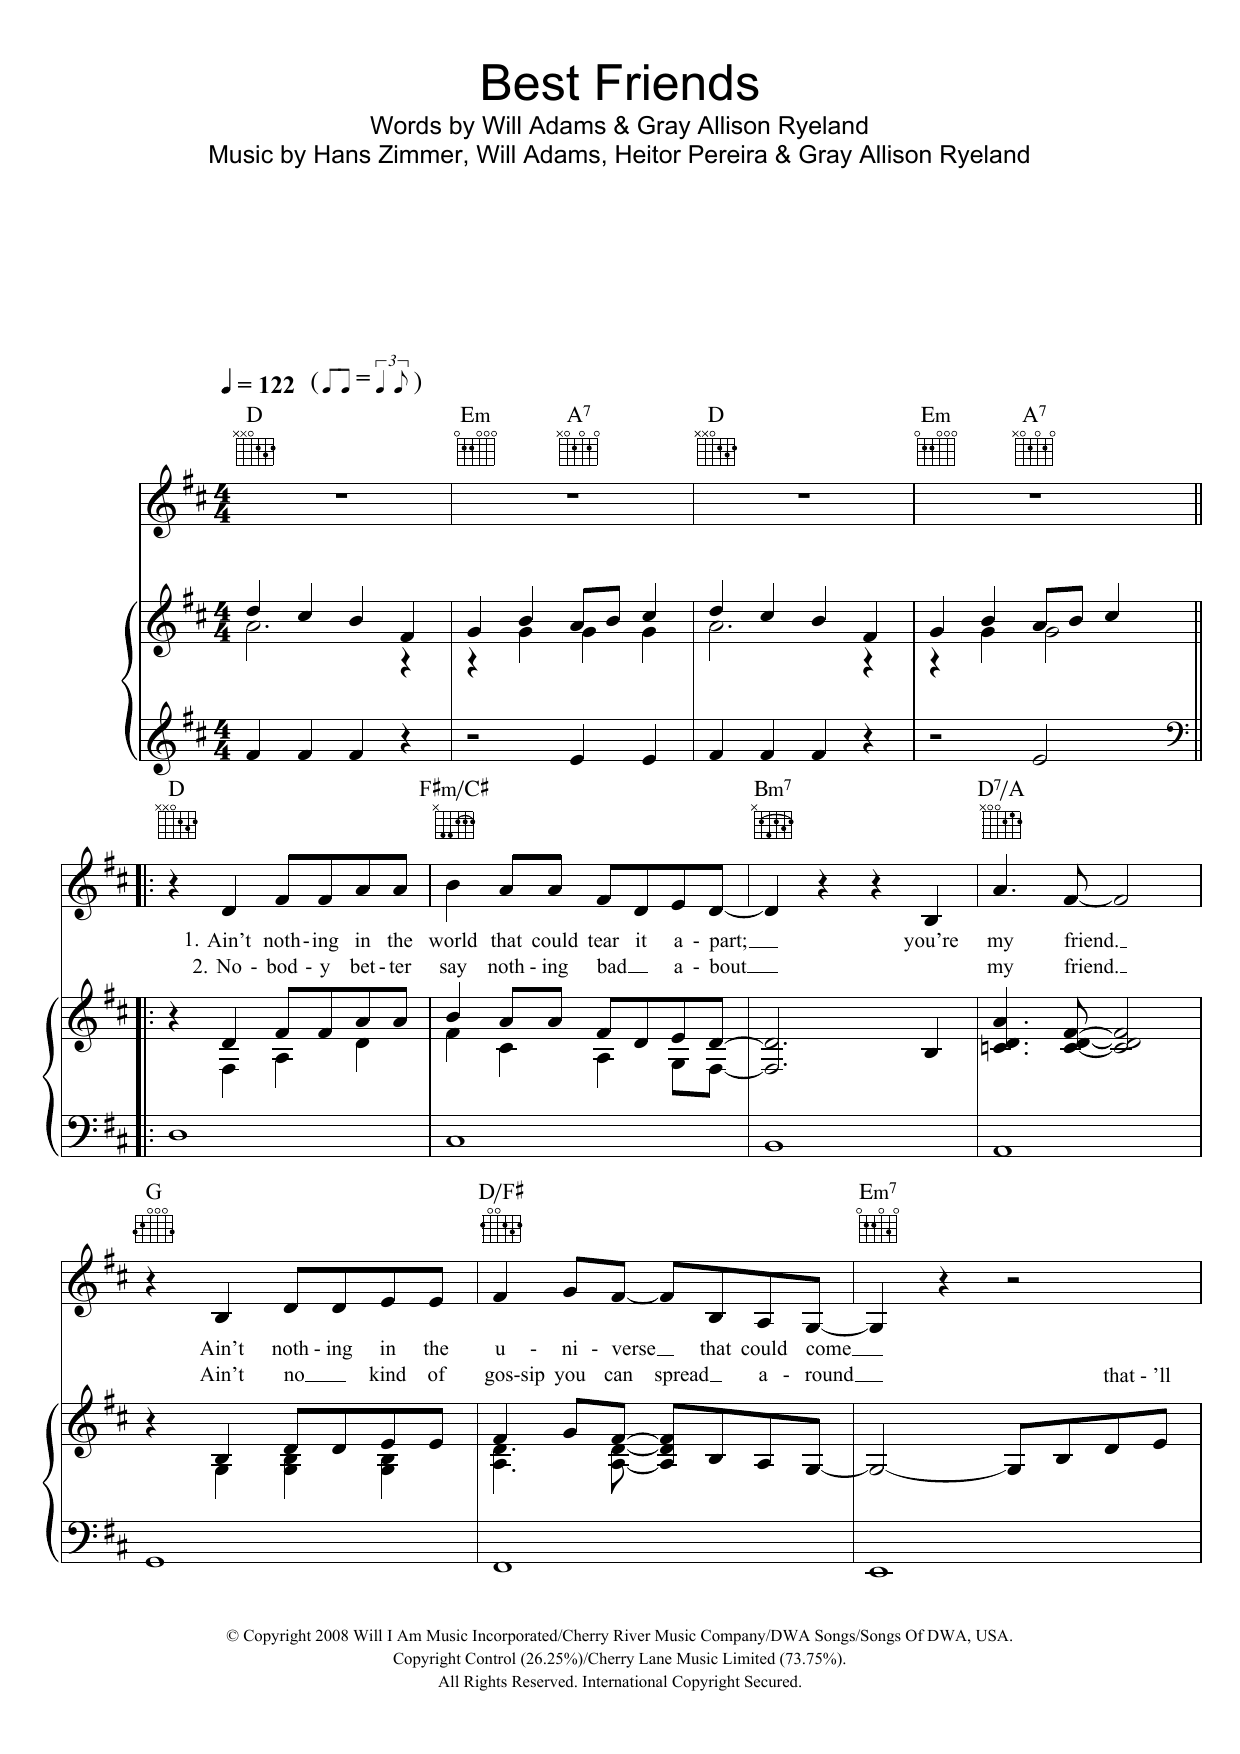 Download will.i.am Best Friends (From Madagascar 2) Sheet Music